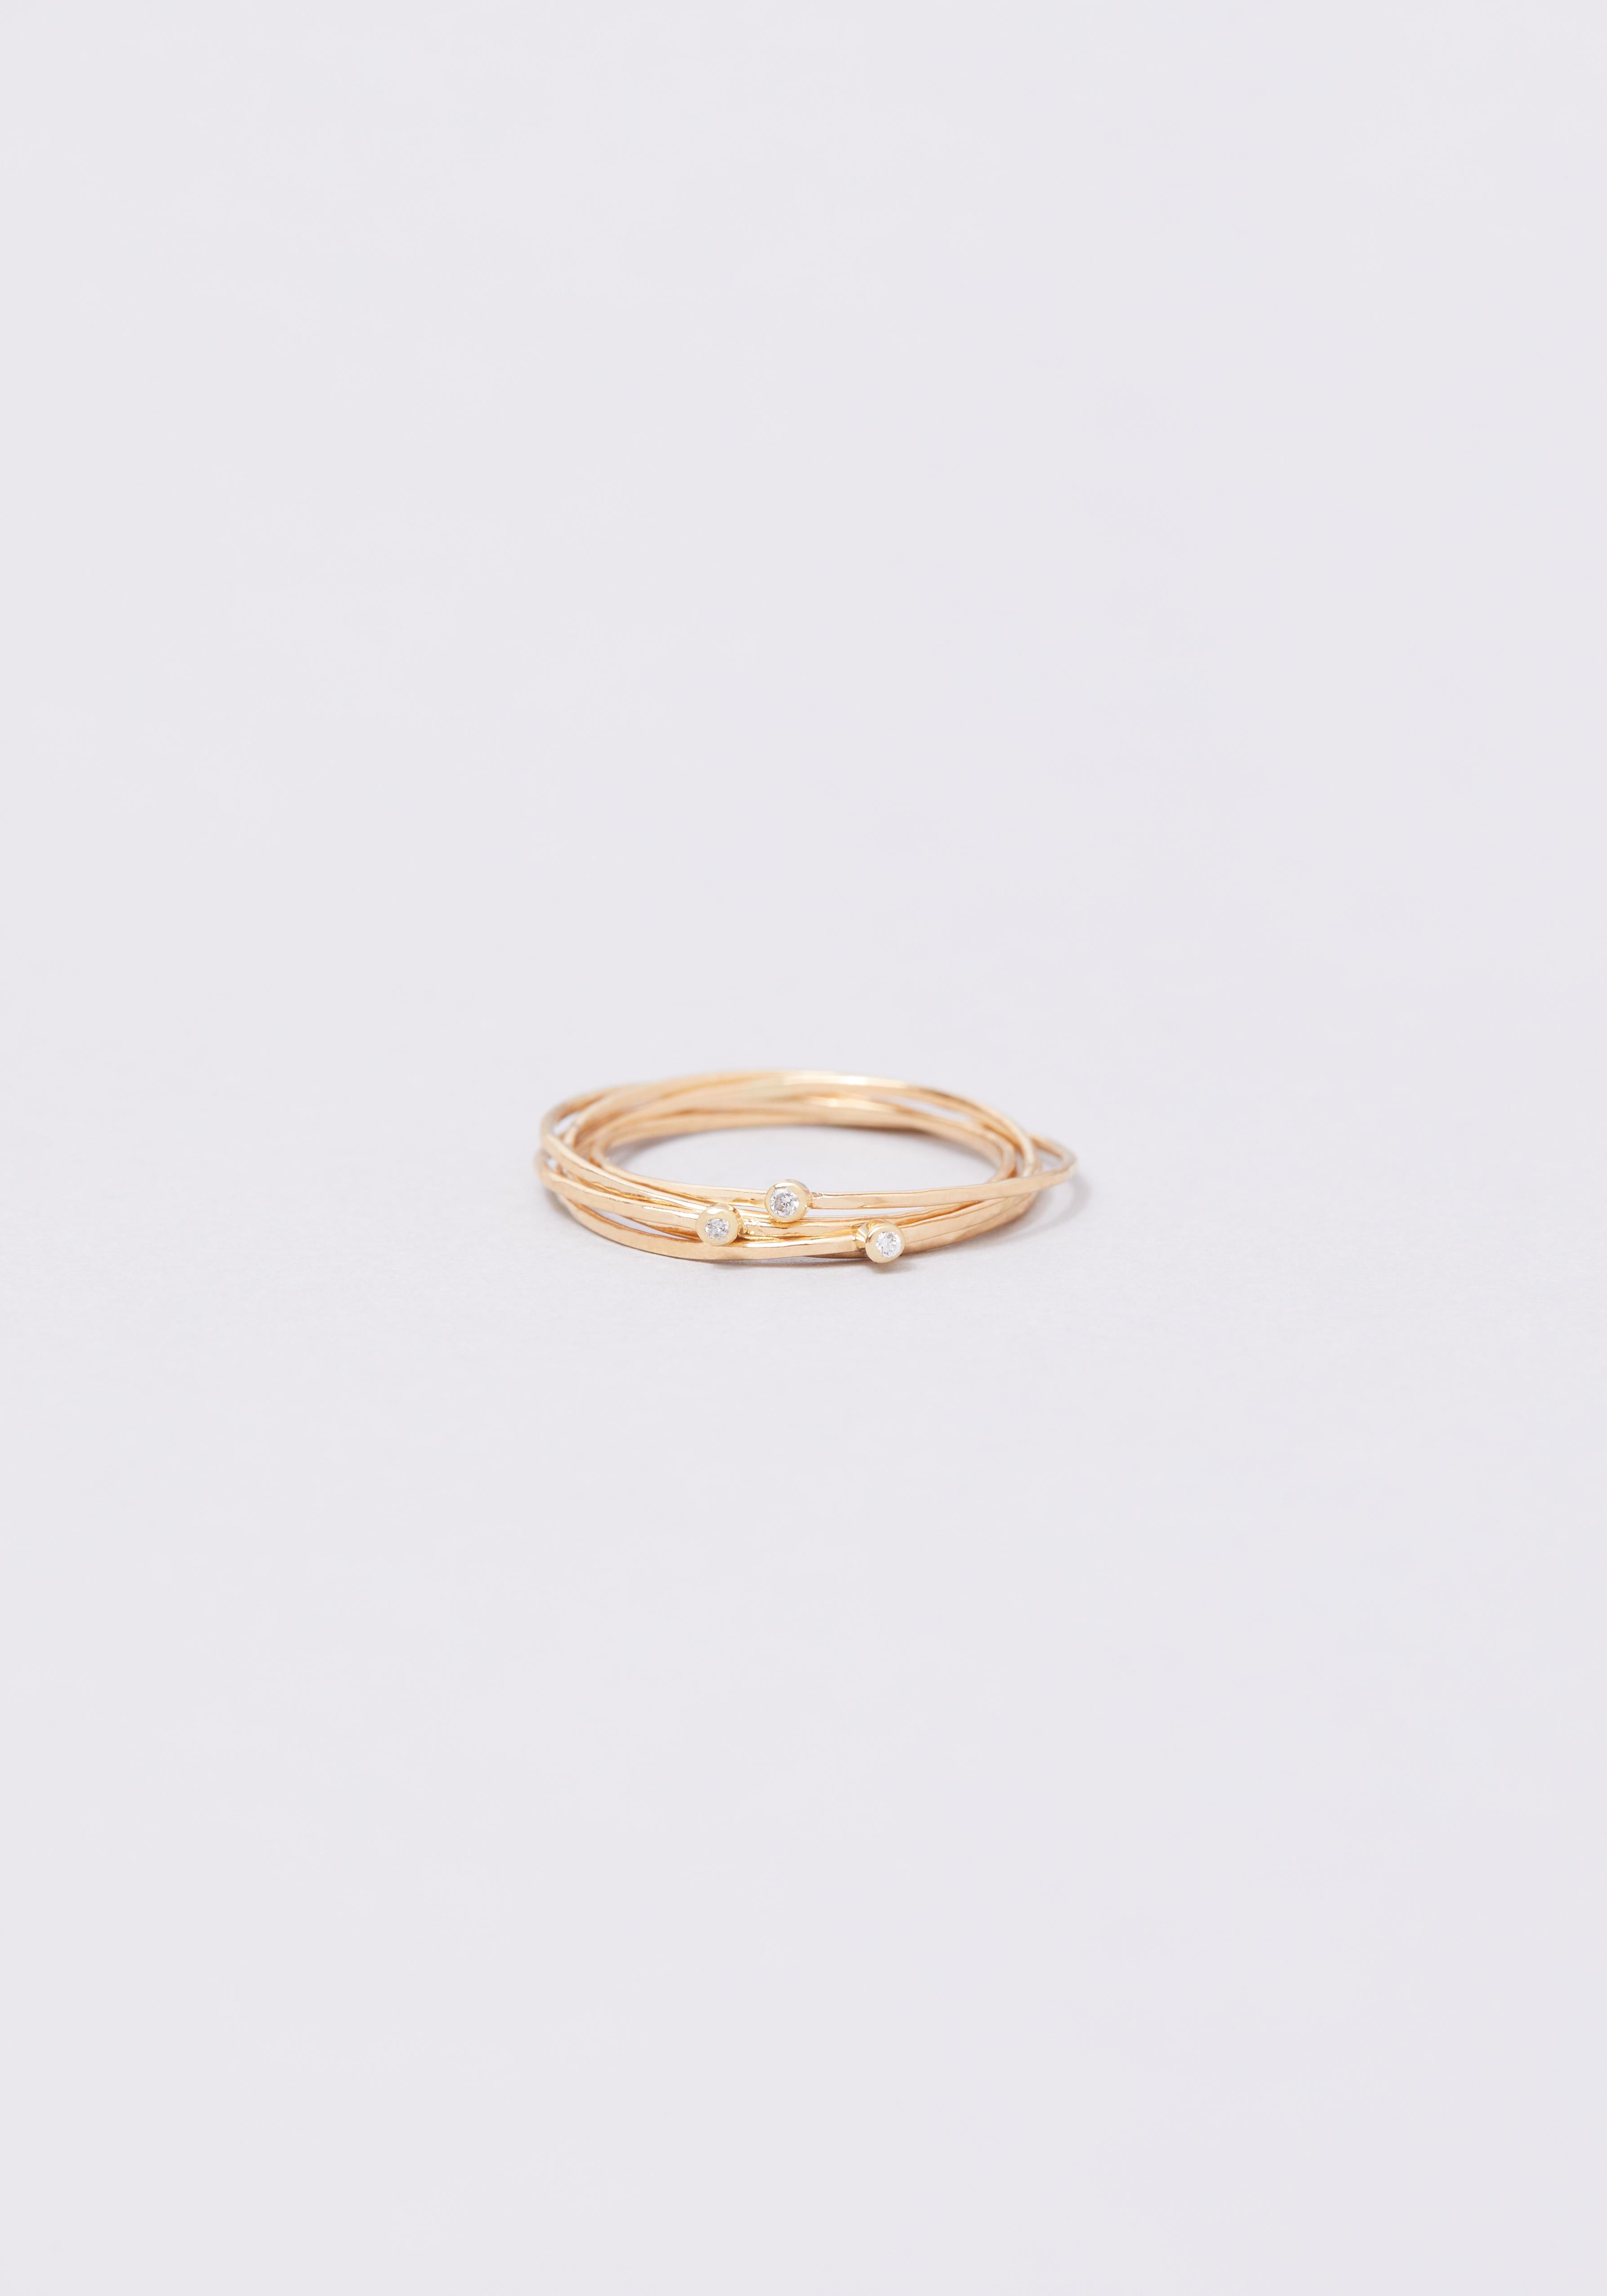 A variation of the Olympe ring, the first Monsieur Paris deisgn, the Olympe 3 tubes in 18-karat gold is made up of five interlaced bands with white diamonds. Available in yellow, rose, or white gold, the Olympe 3 tubes ring can be worn on its own or